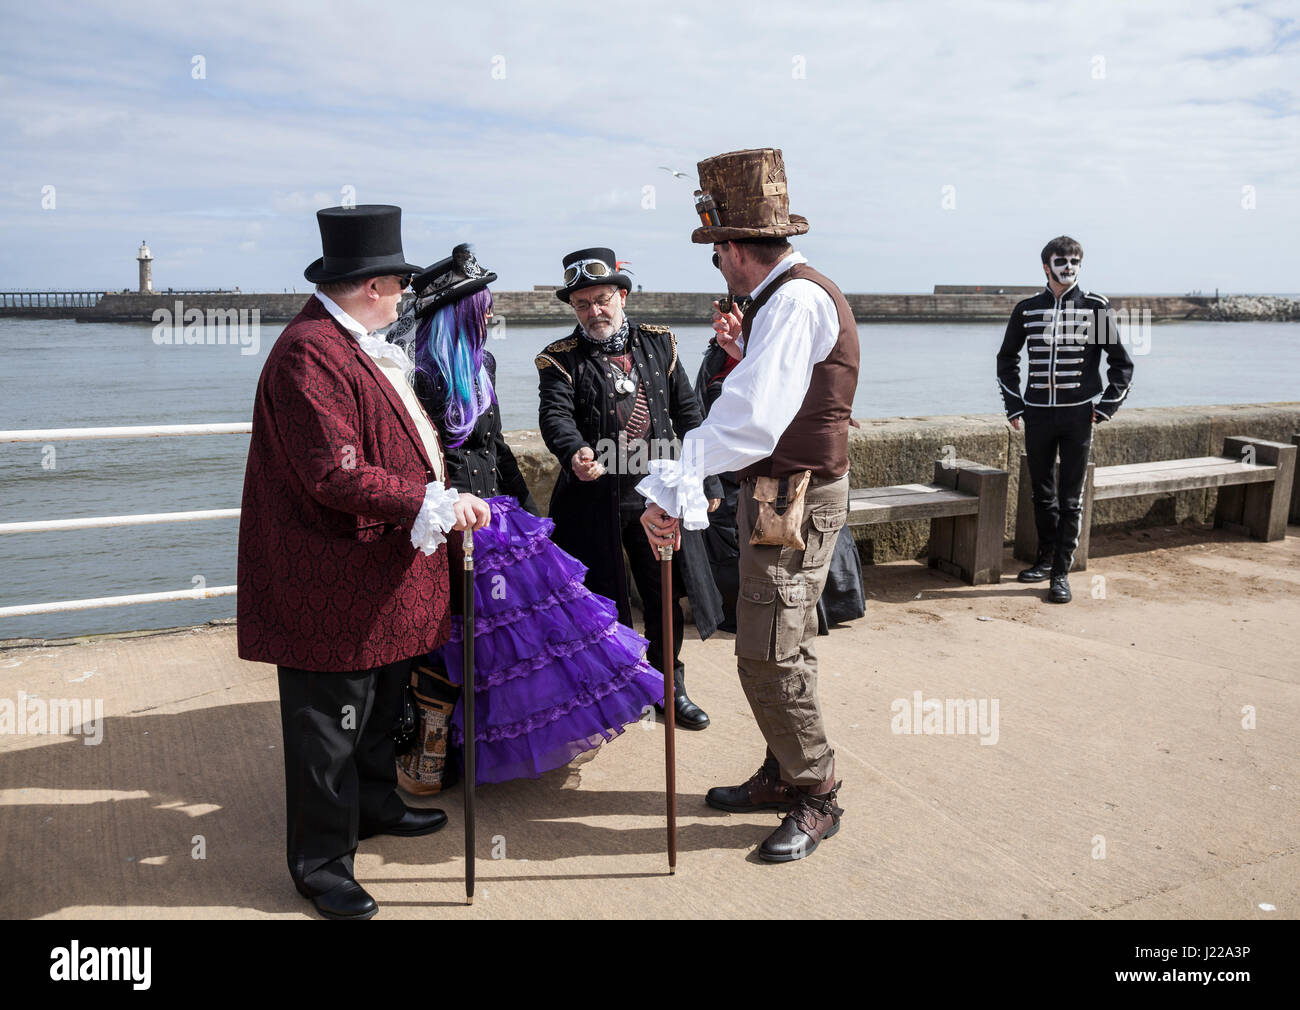 A group of people dressed in Steampunk fashion chat together on the quayside at Whitby at the Goth Weekend celebrations,North Yorkshire,England,UK Stock Photo